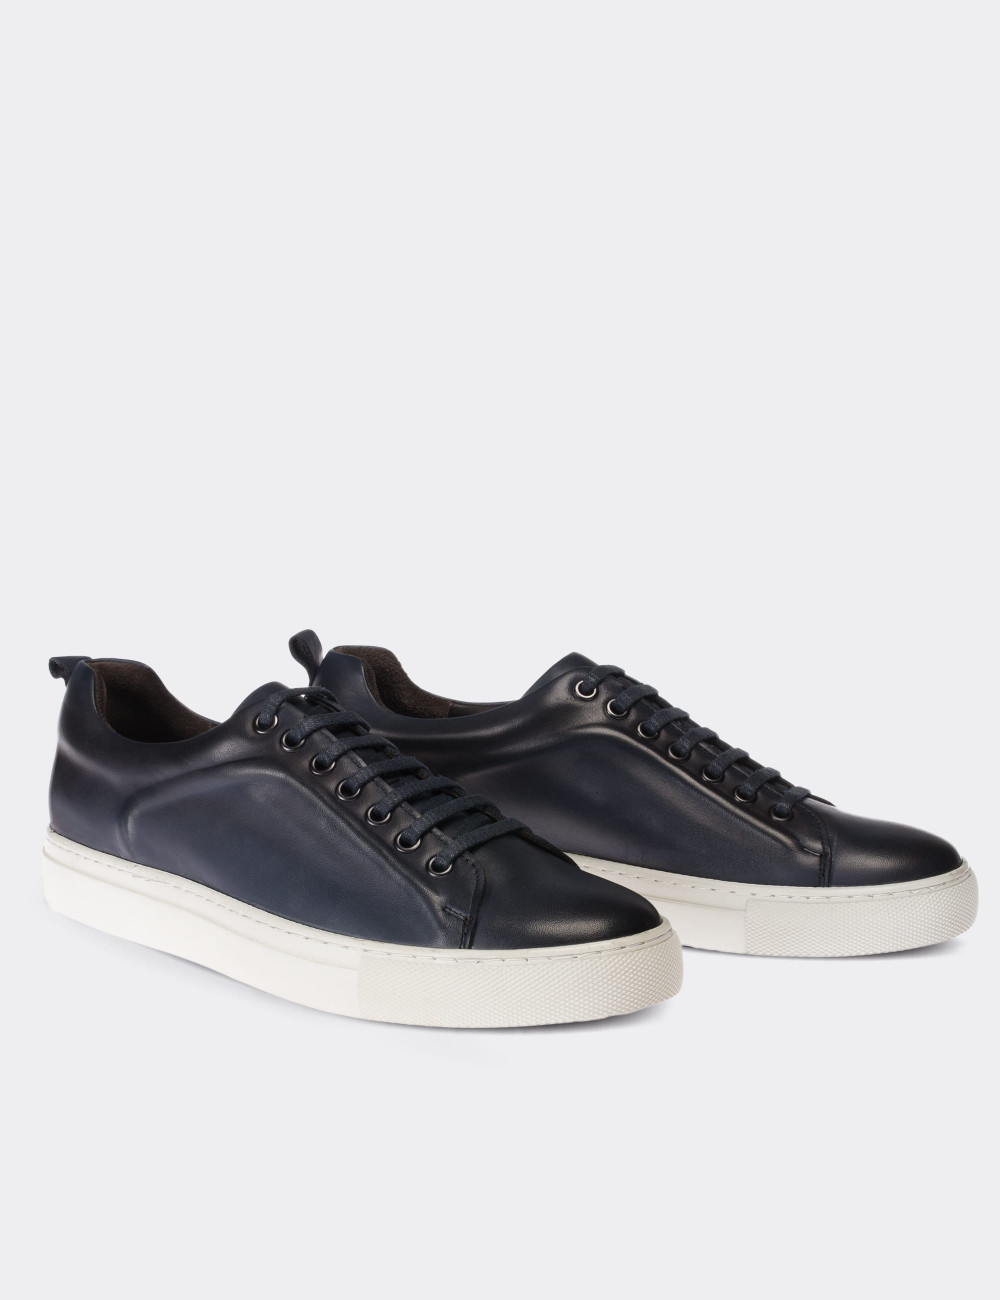 Blue  Leather Sneakers - 01669MMVIC03